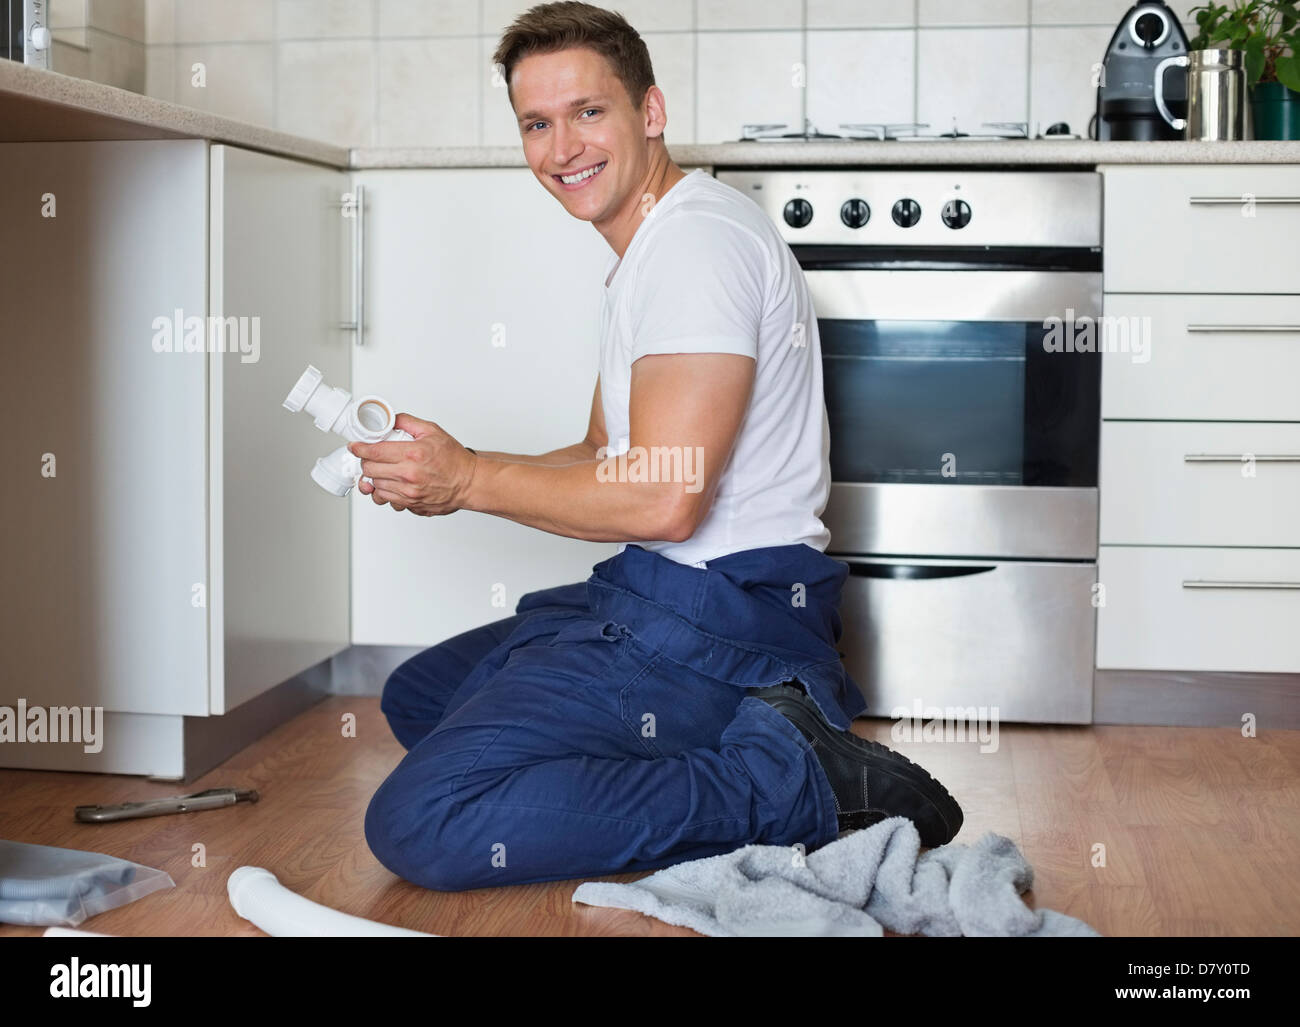 Plumber working on pipes under sink Stock Photo